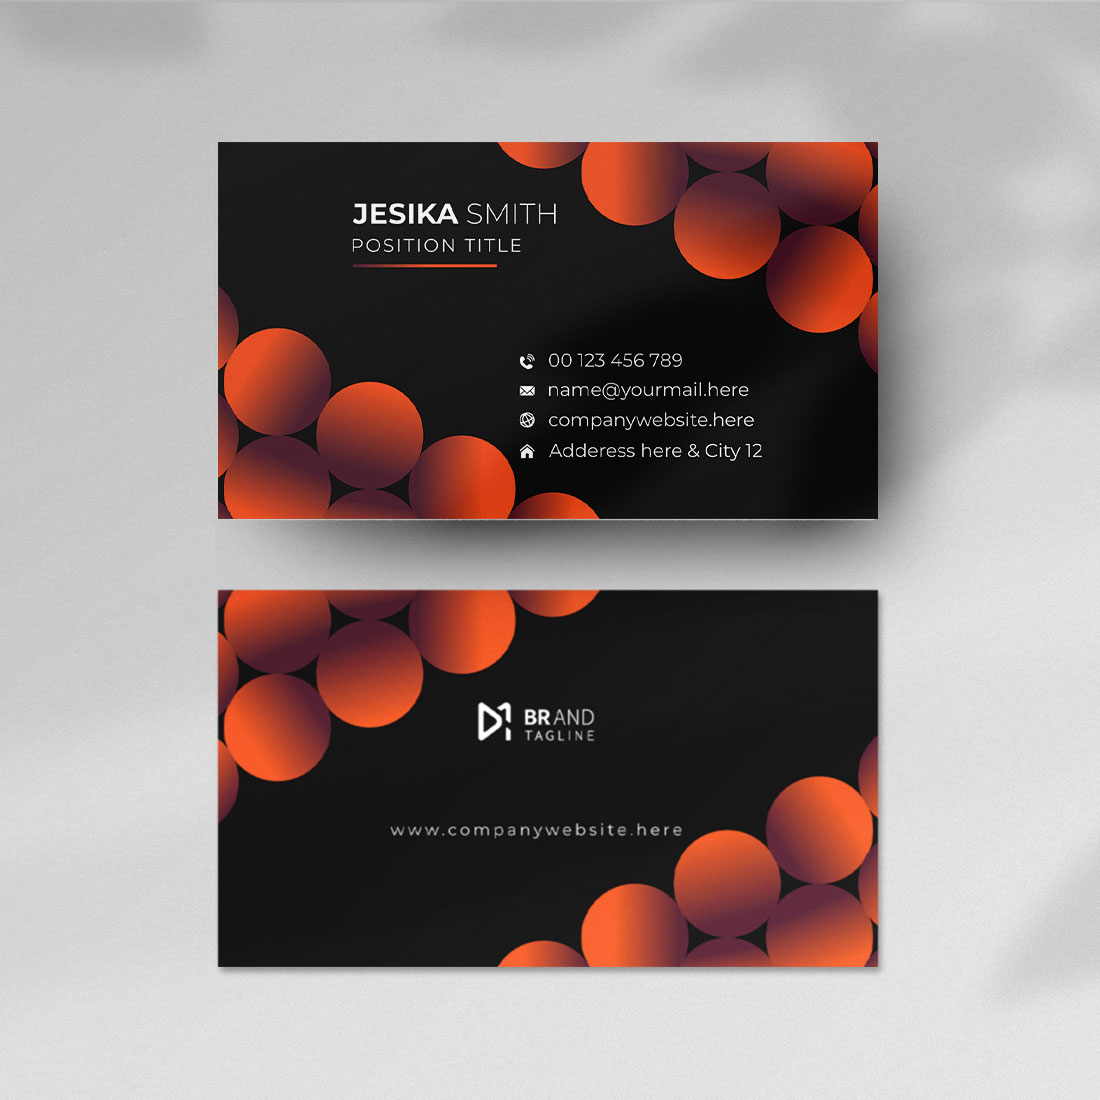 Elegant company business card template cover image.